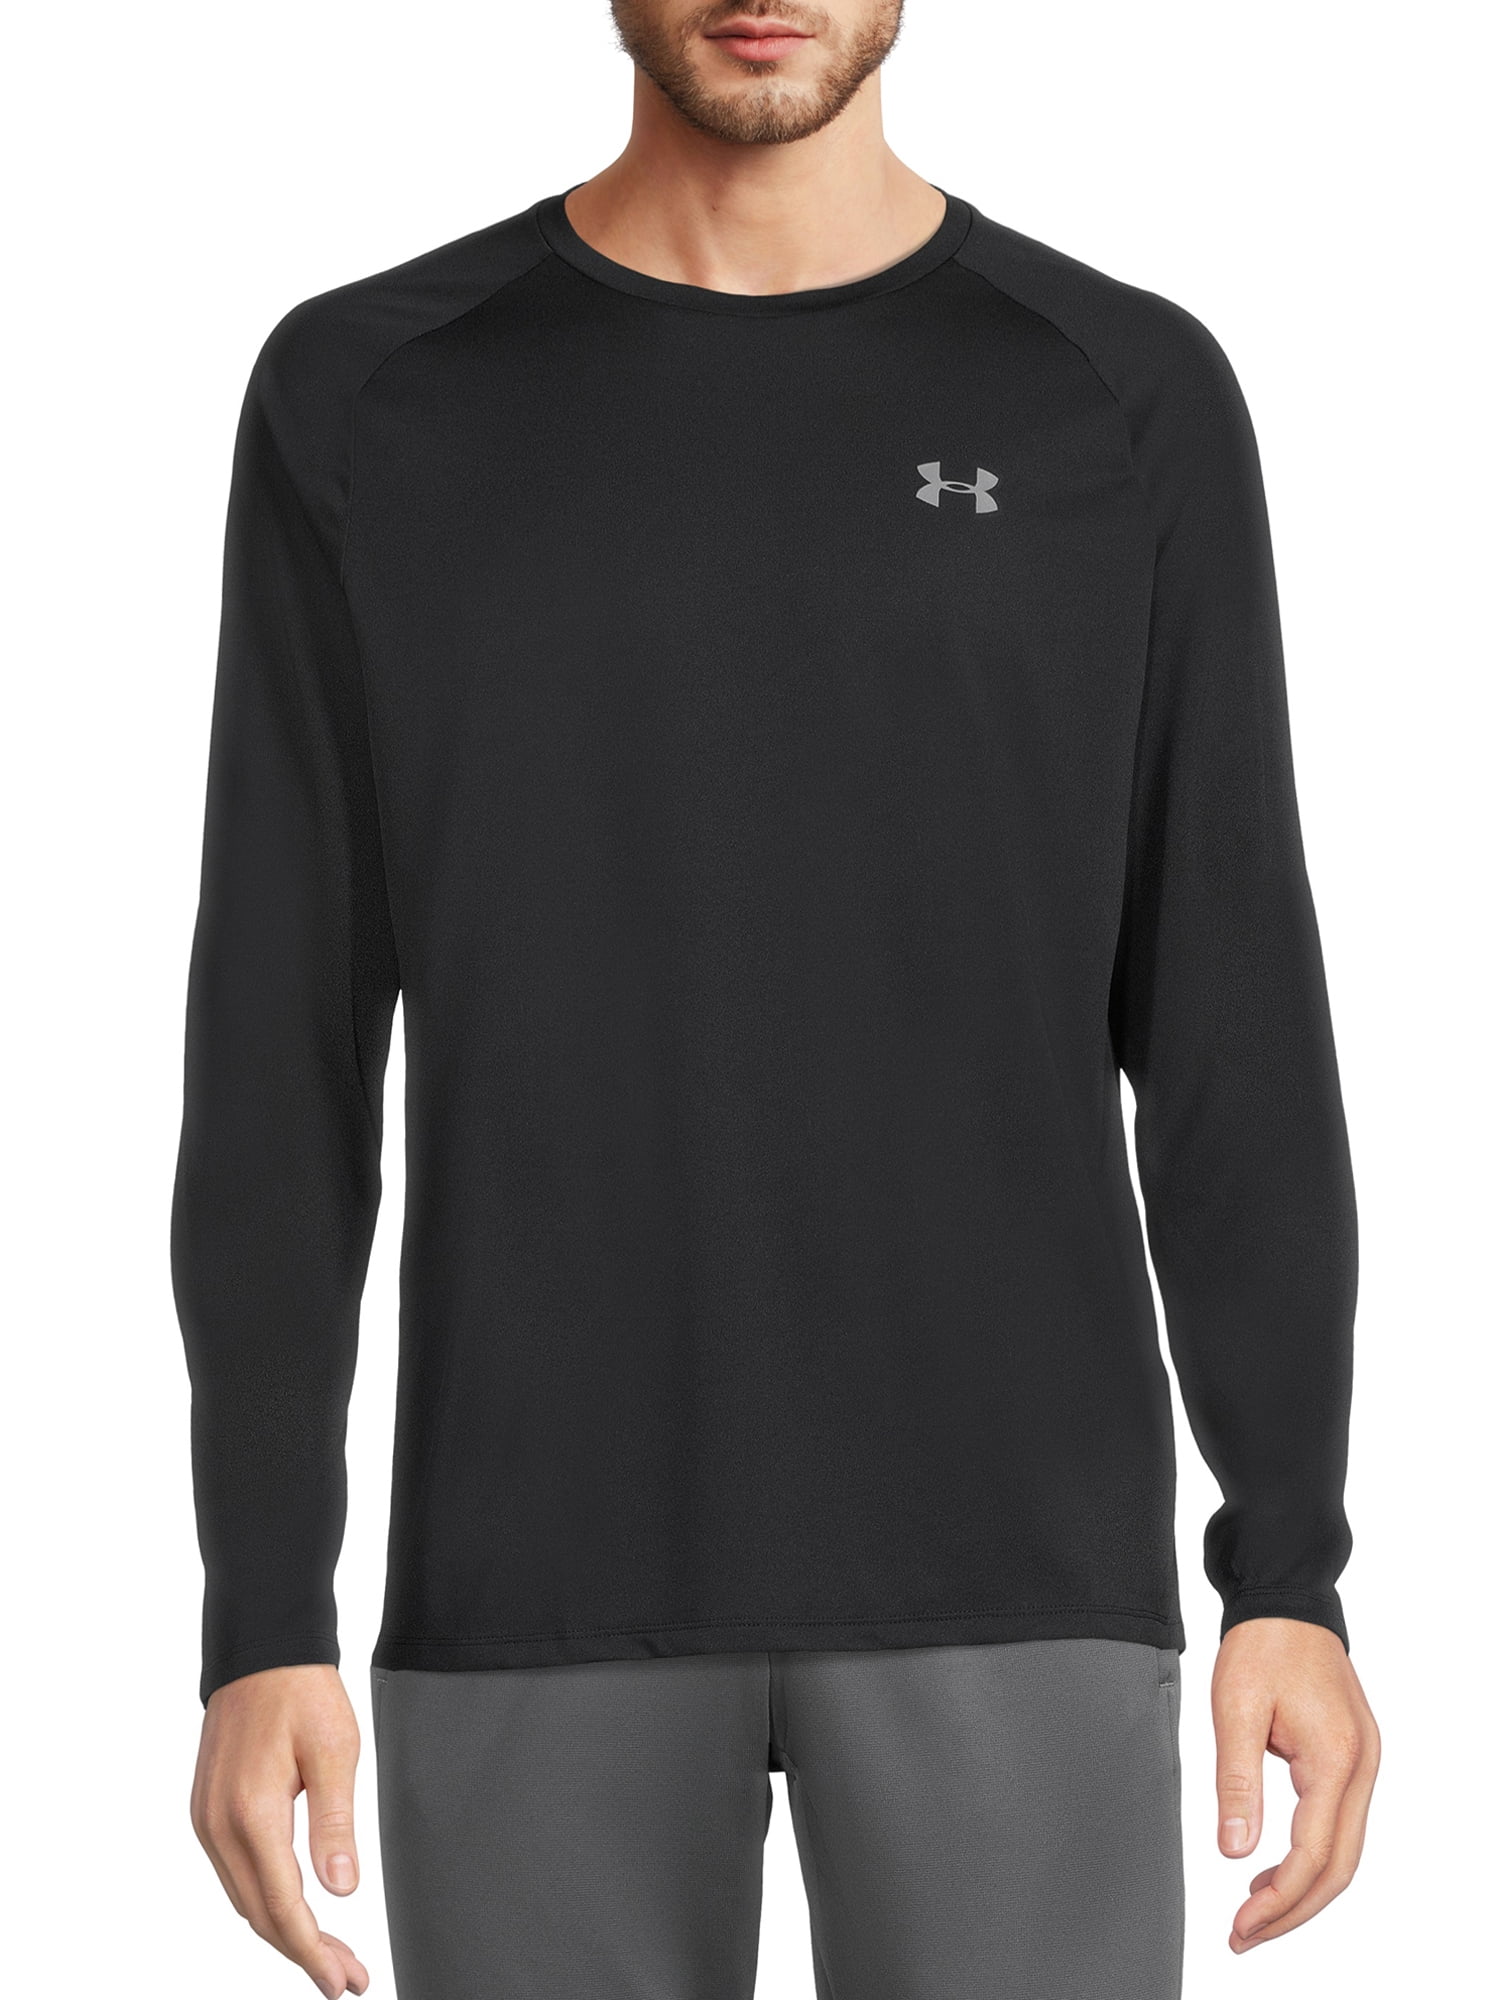 New Under Armour Men's Siro Utility 3/4 Sleeve Gym Active T-Shirt Navy 